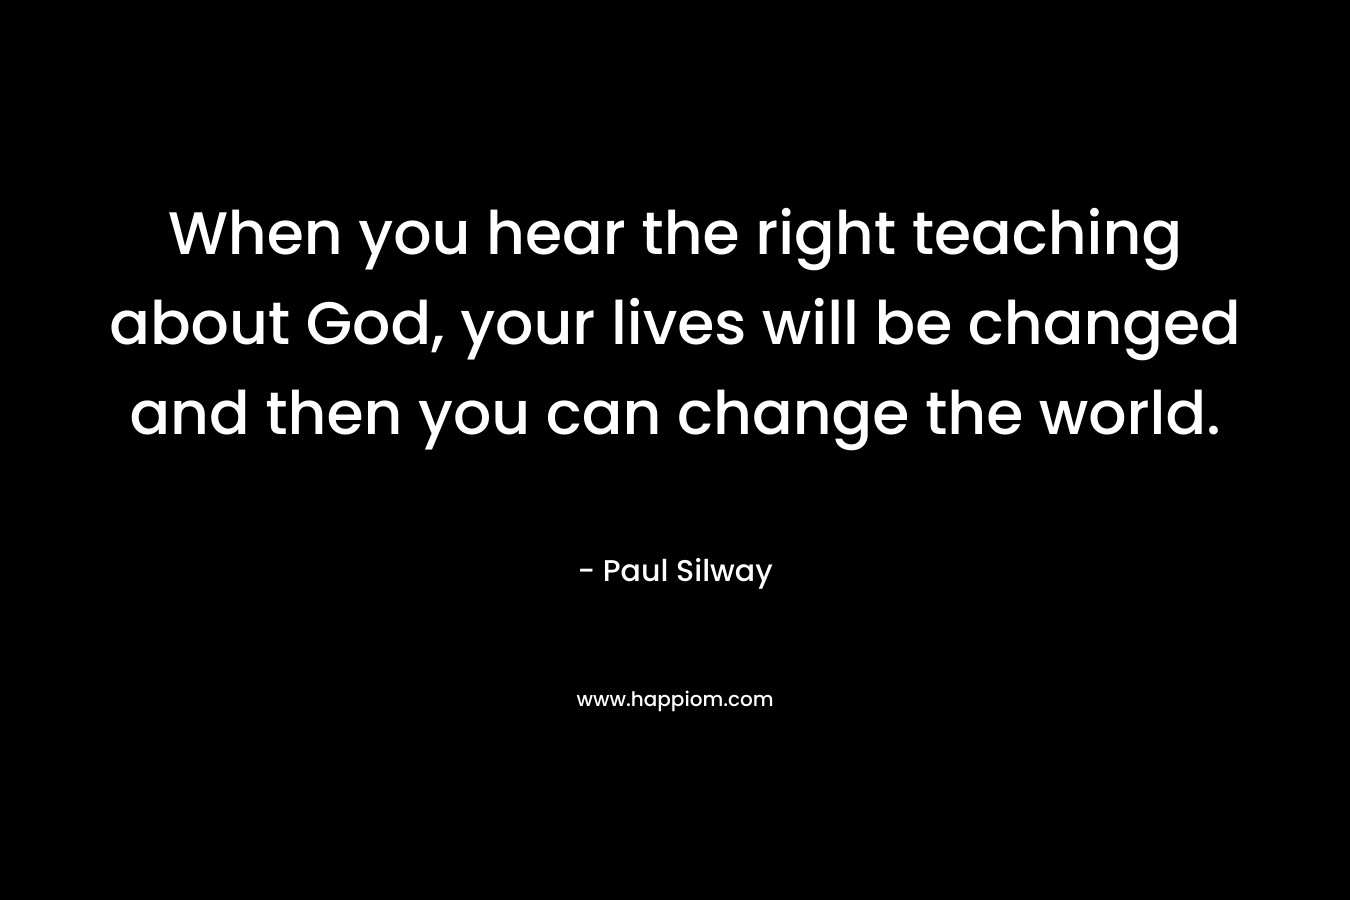 When you hear the right teaching about God, your lives will be changed and then you can change the world. – Paul Silway